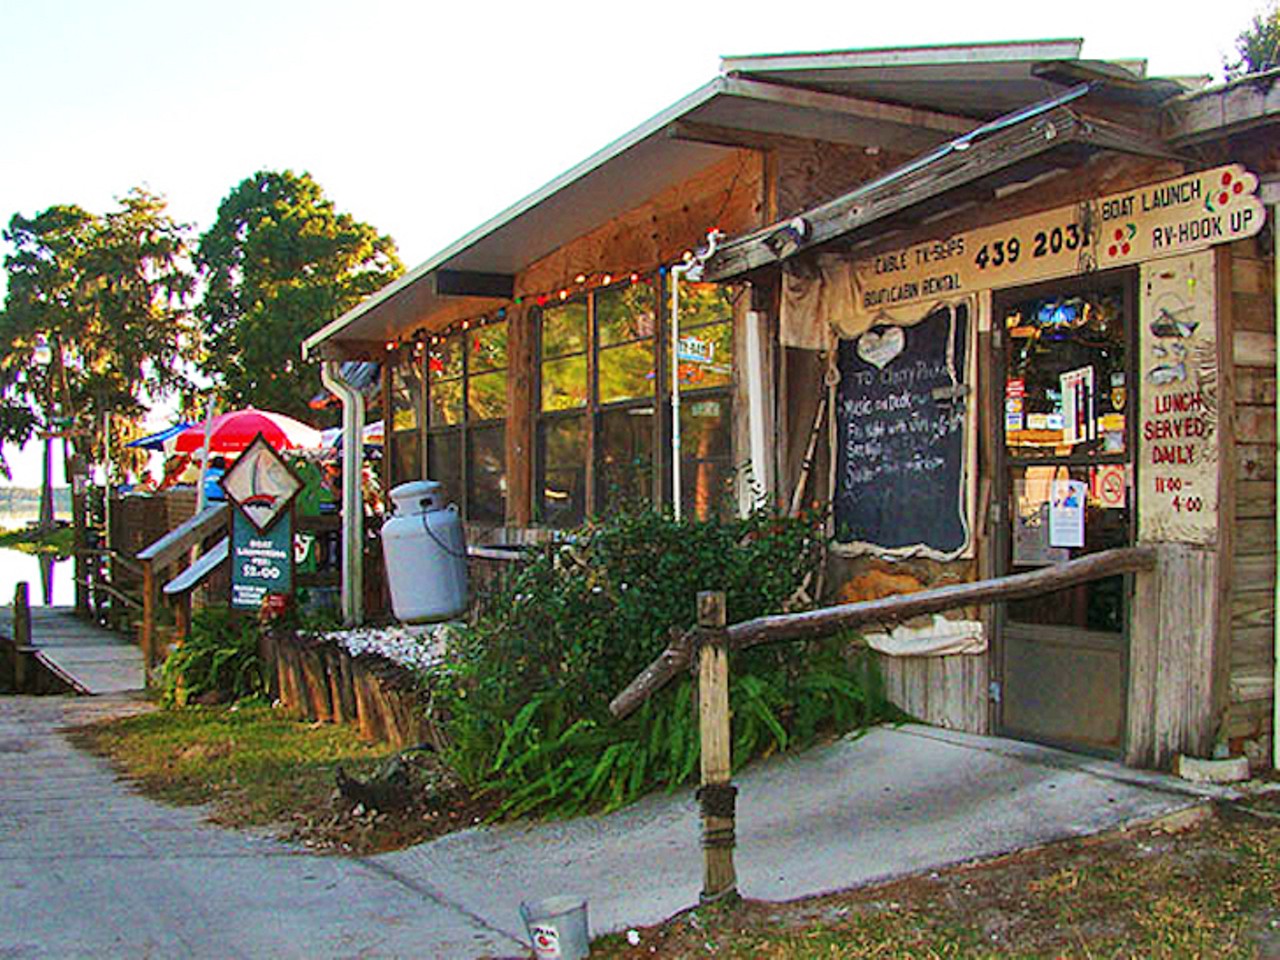  Cherry Pocket Steak & Seafood Shak
3100 Canal Road, Lake Wales, 863-439-2031
Restaurant and bar attached to the Cherry Pocket fish camp and motel on Lake Wales serves up heaping helpings of fried (and otherwise) seafood. No C in that Shak!
Photo via Cherry Pocket&#146;s website